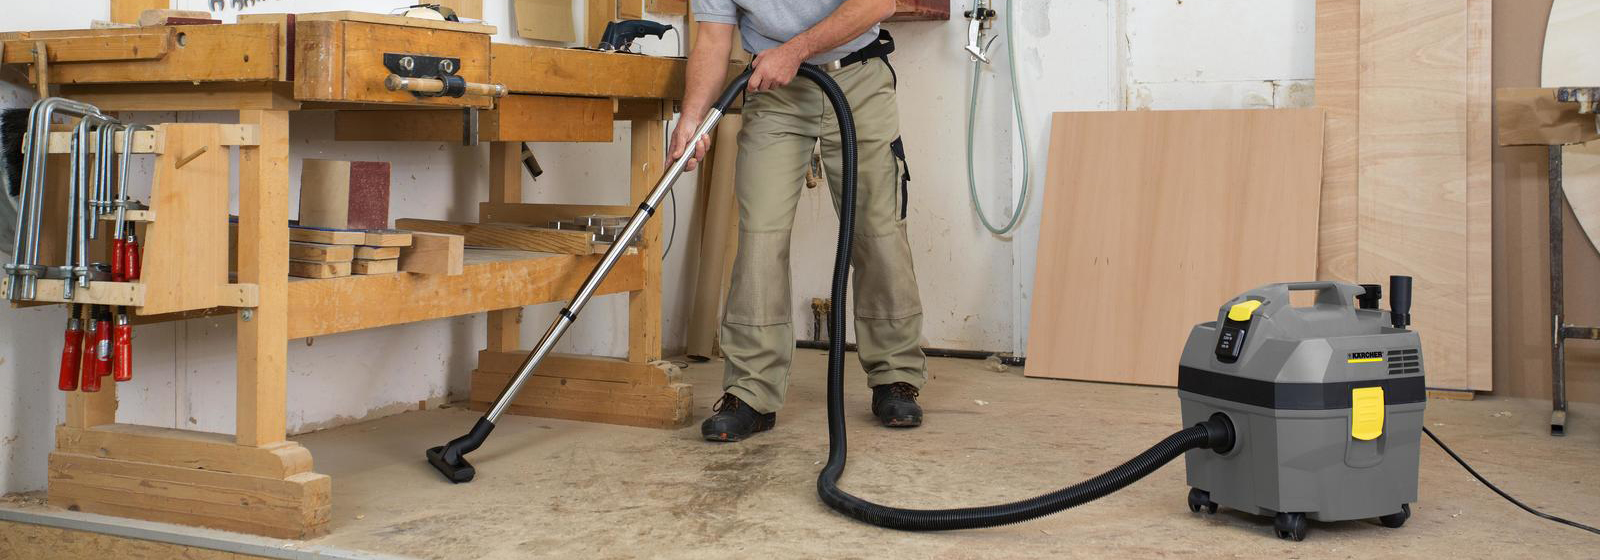 Kärcher Professional Wet and Dry Vacuum Cleaner - Ap Class